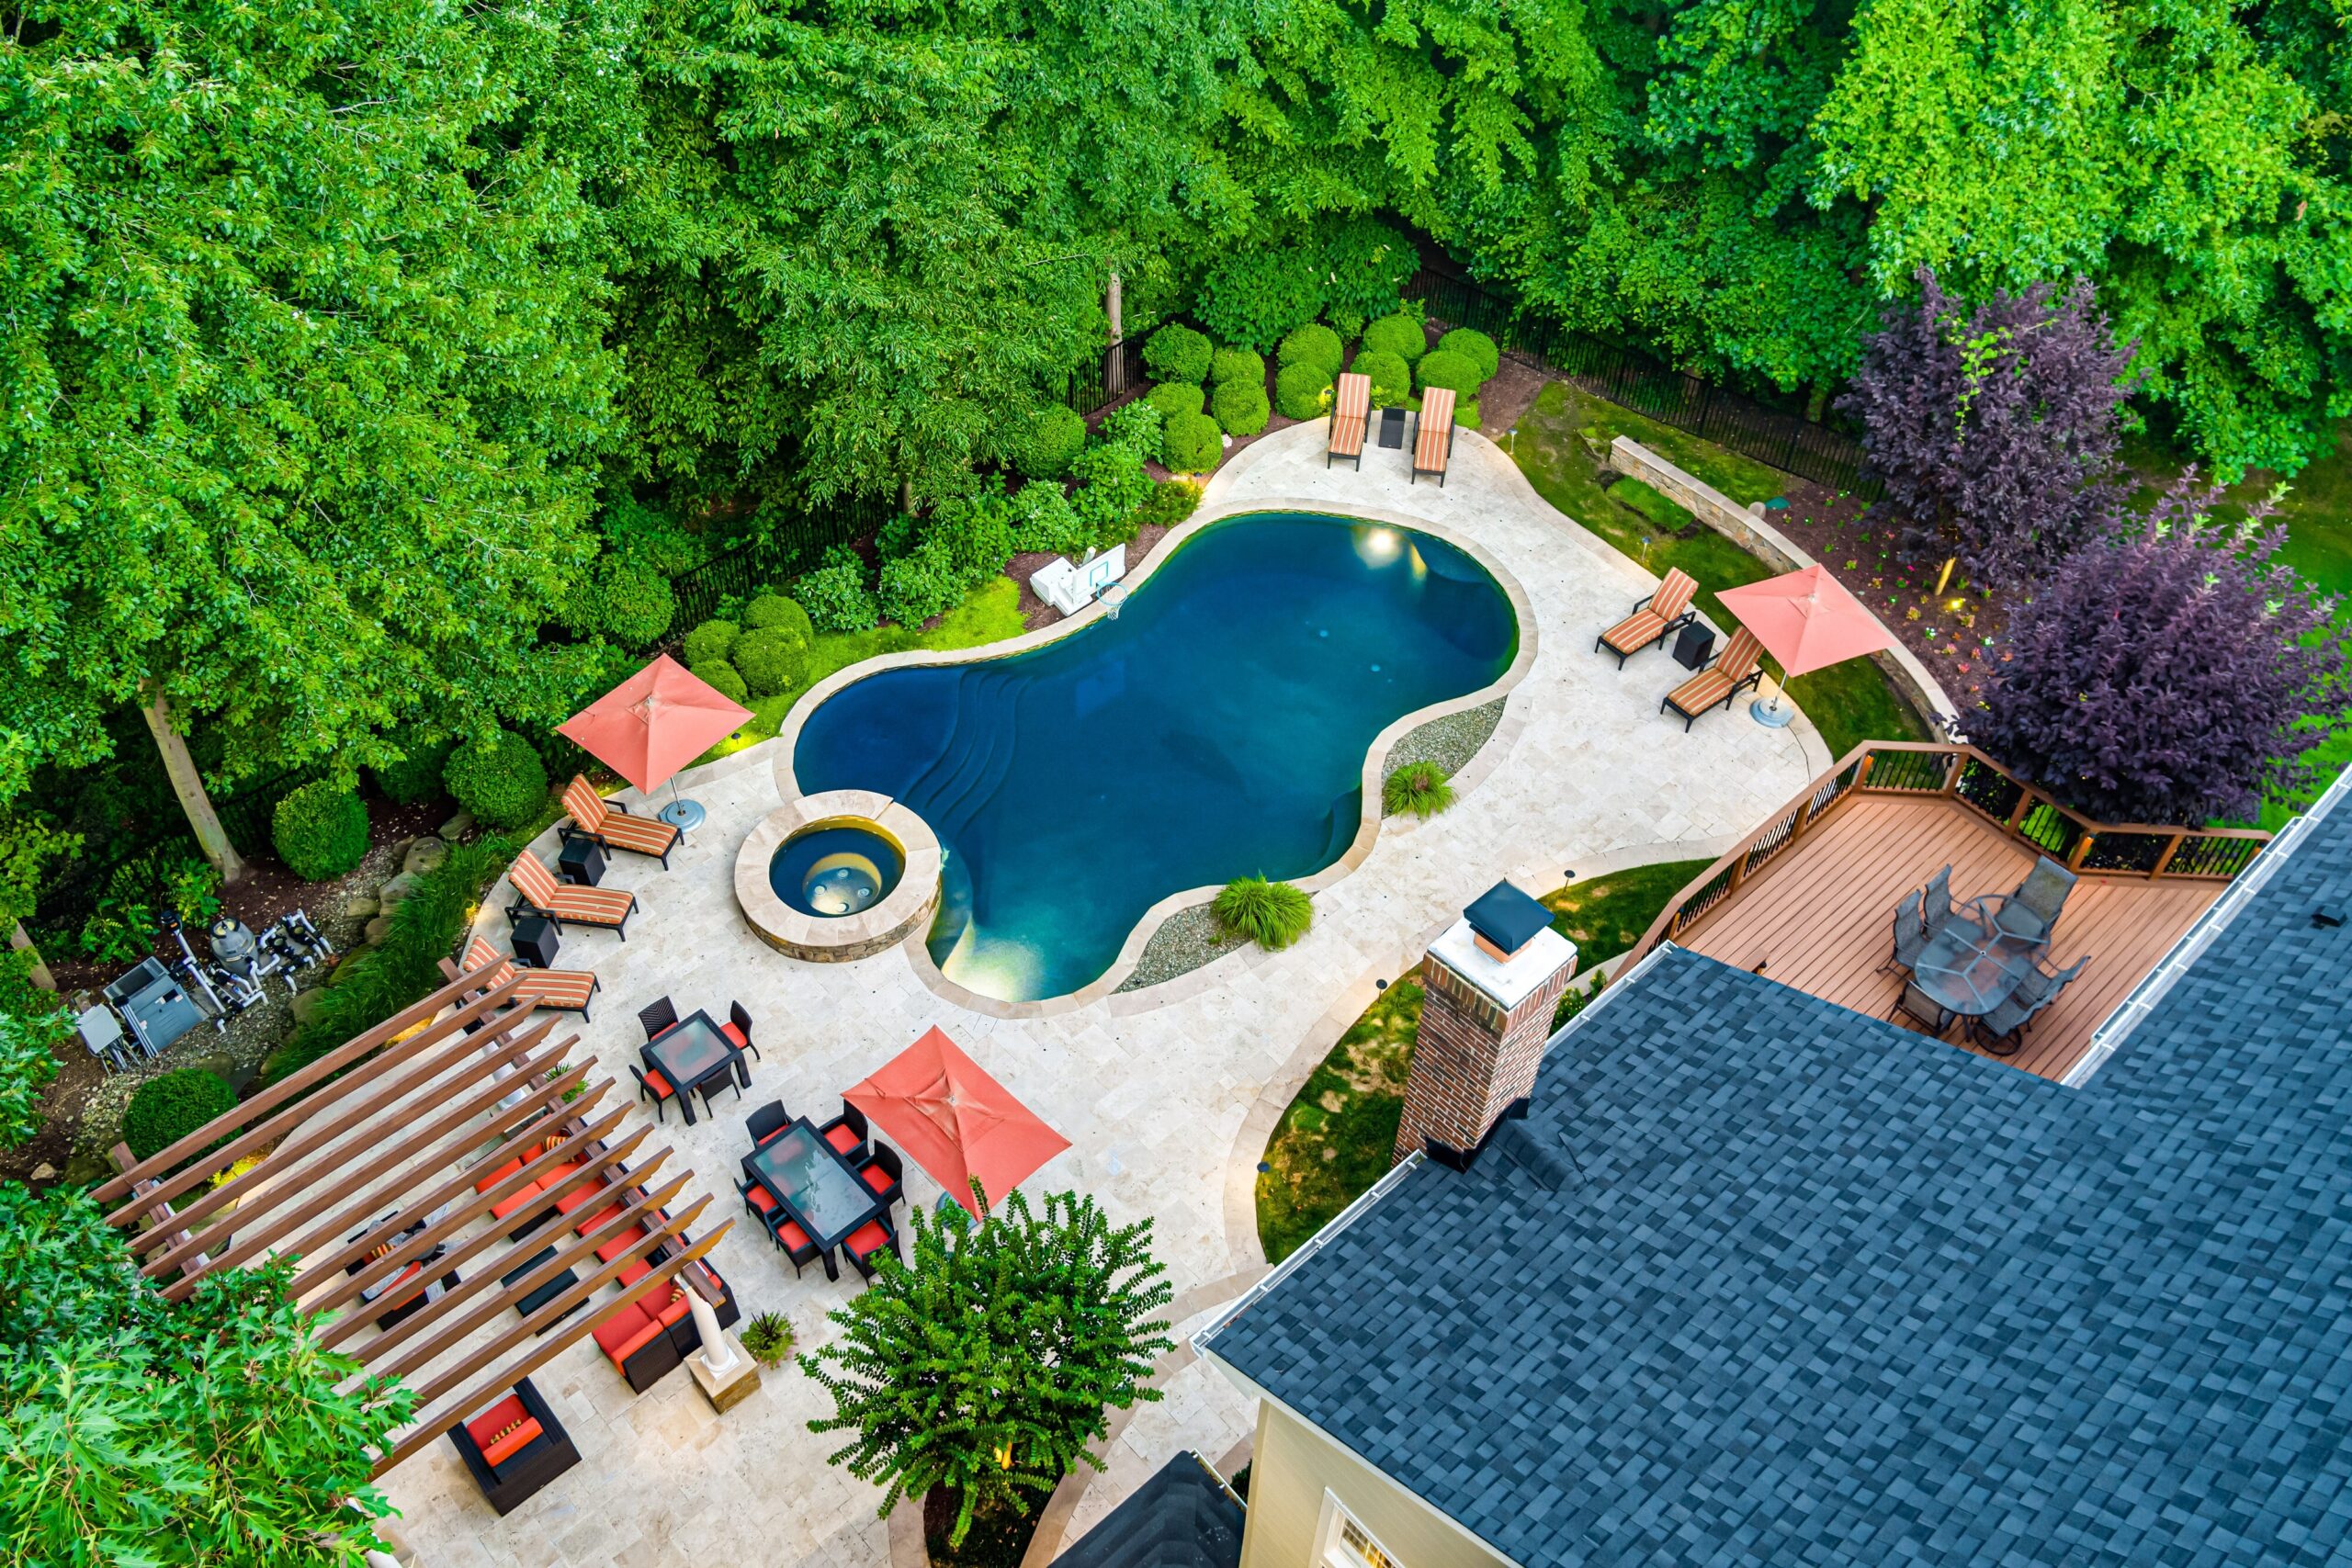 Aerial drone photo of the backyard space, showing the pool, hot tub, lounge and seating areas, as well as the upper deck. 10703 Ox Croft Ct, Fairfax Station, VA